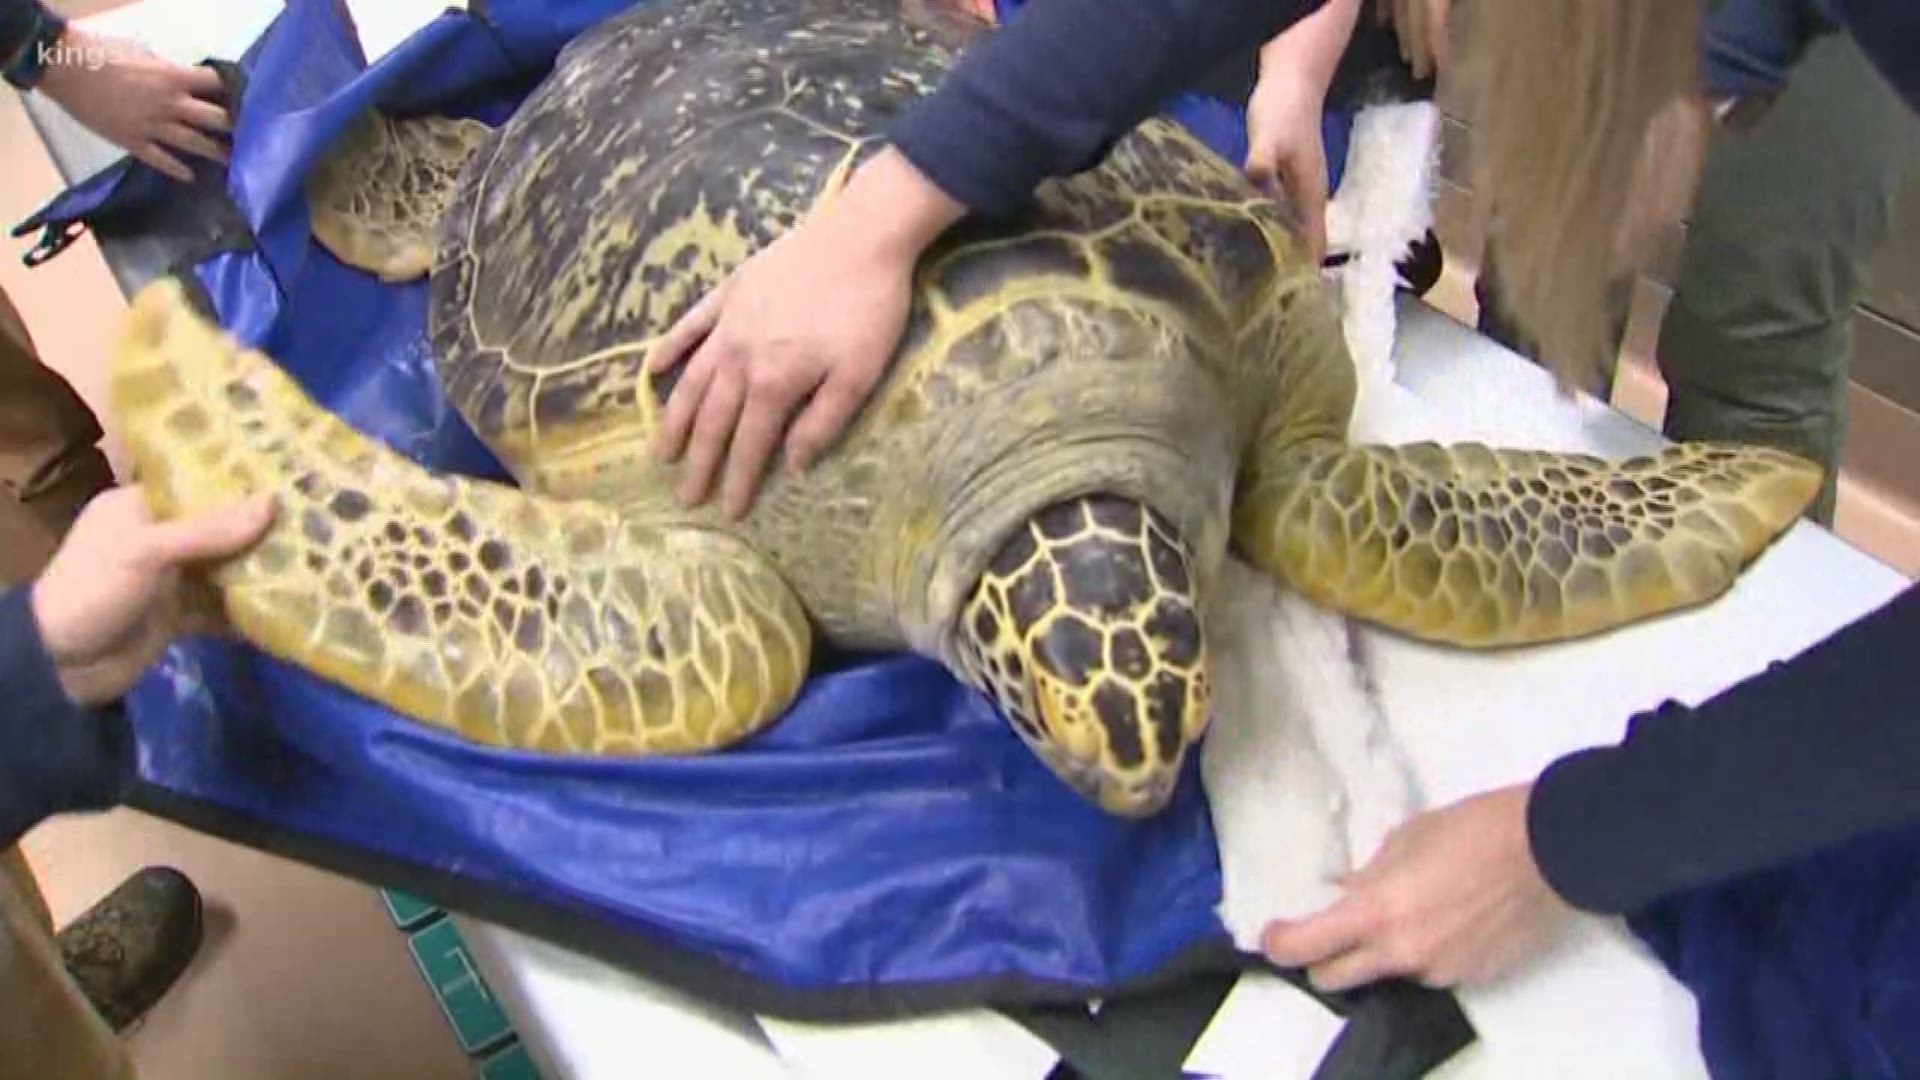 A 23-year-old, 160-pound sea turtle named Bruno is the newest addition to Tacoma’s Point Defiance Zoo and Aquarium.